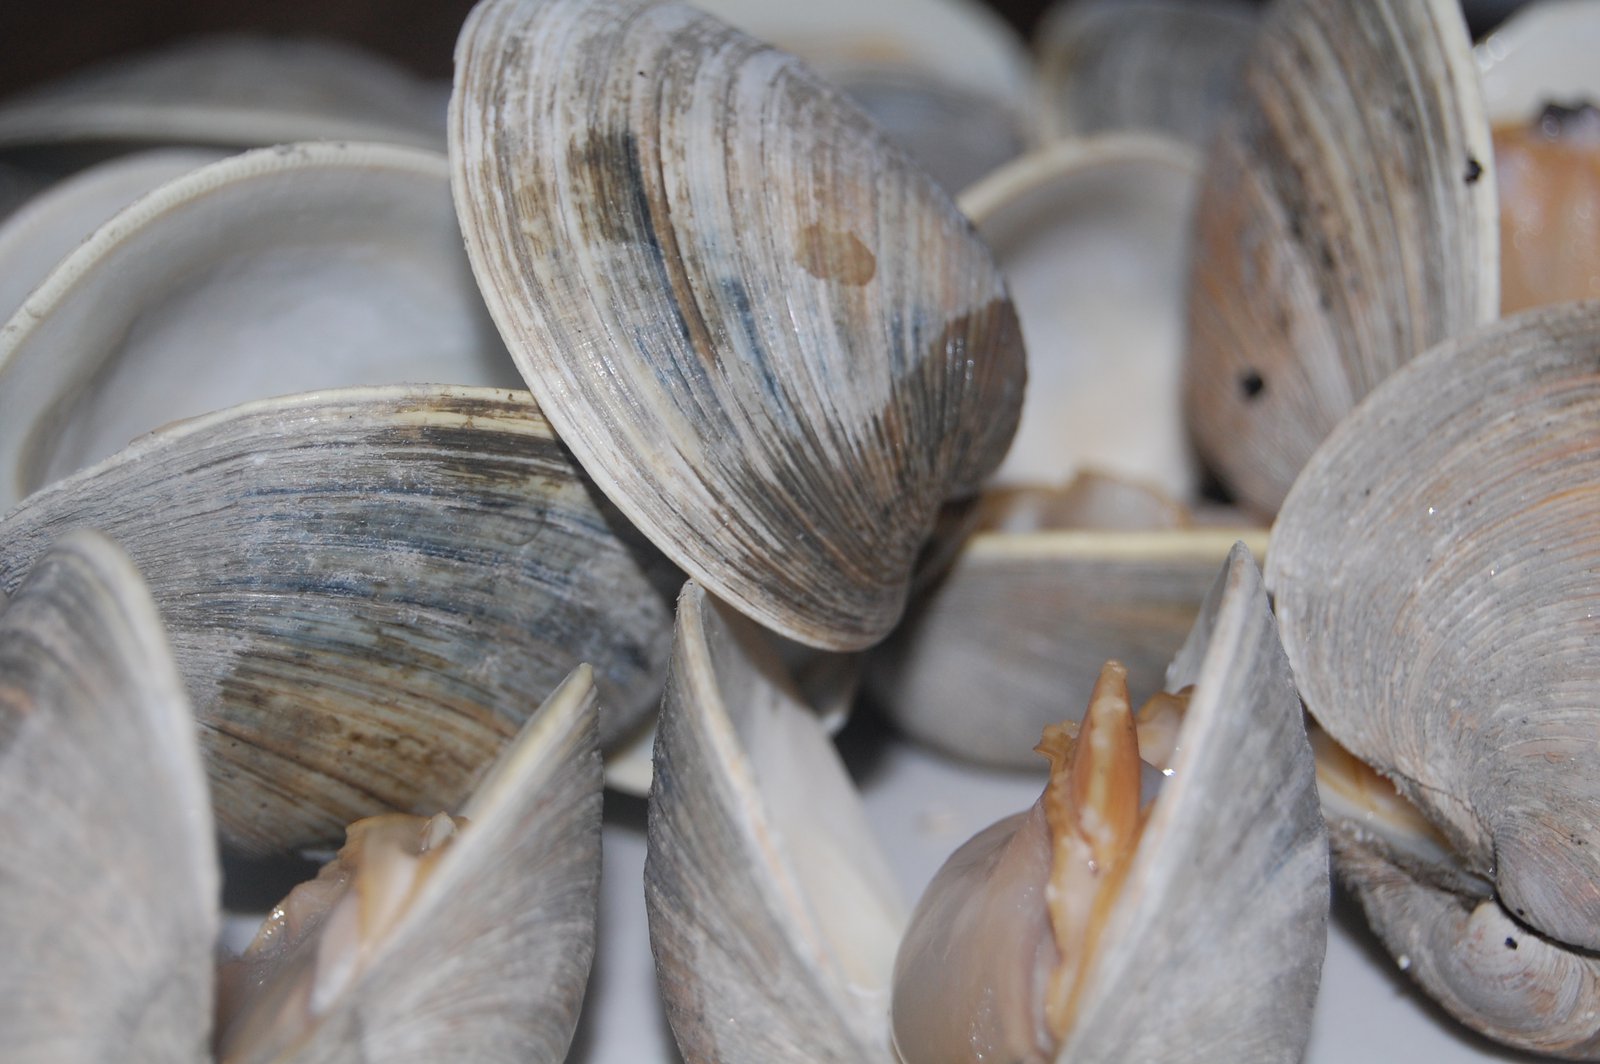 Photo contest week 12 - clams